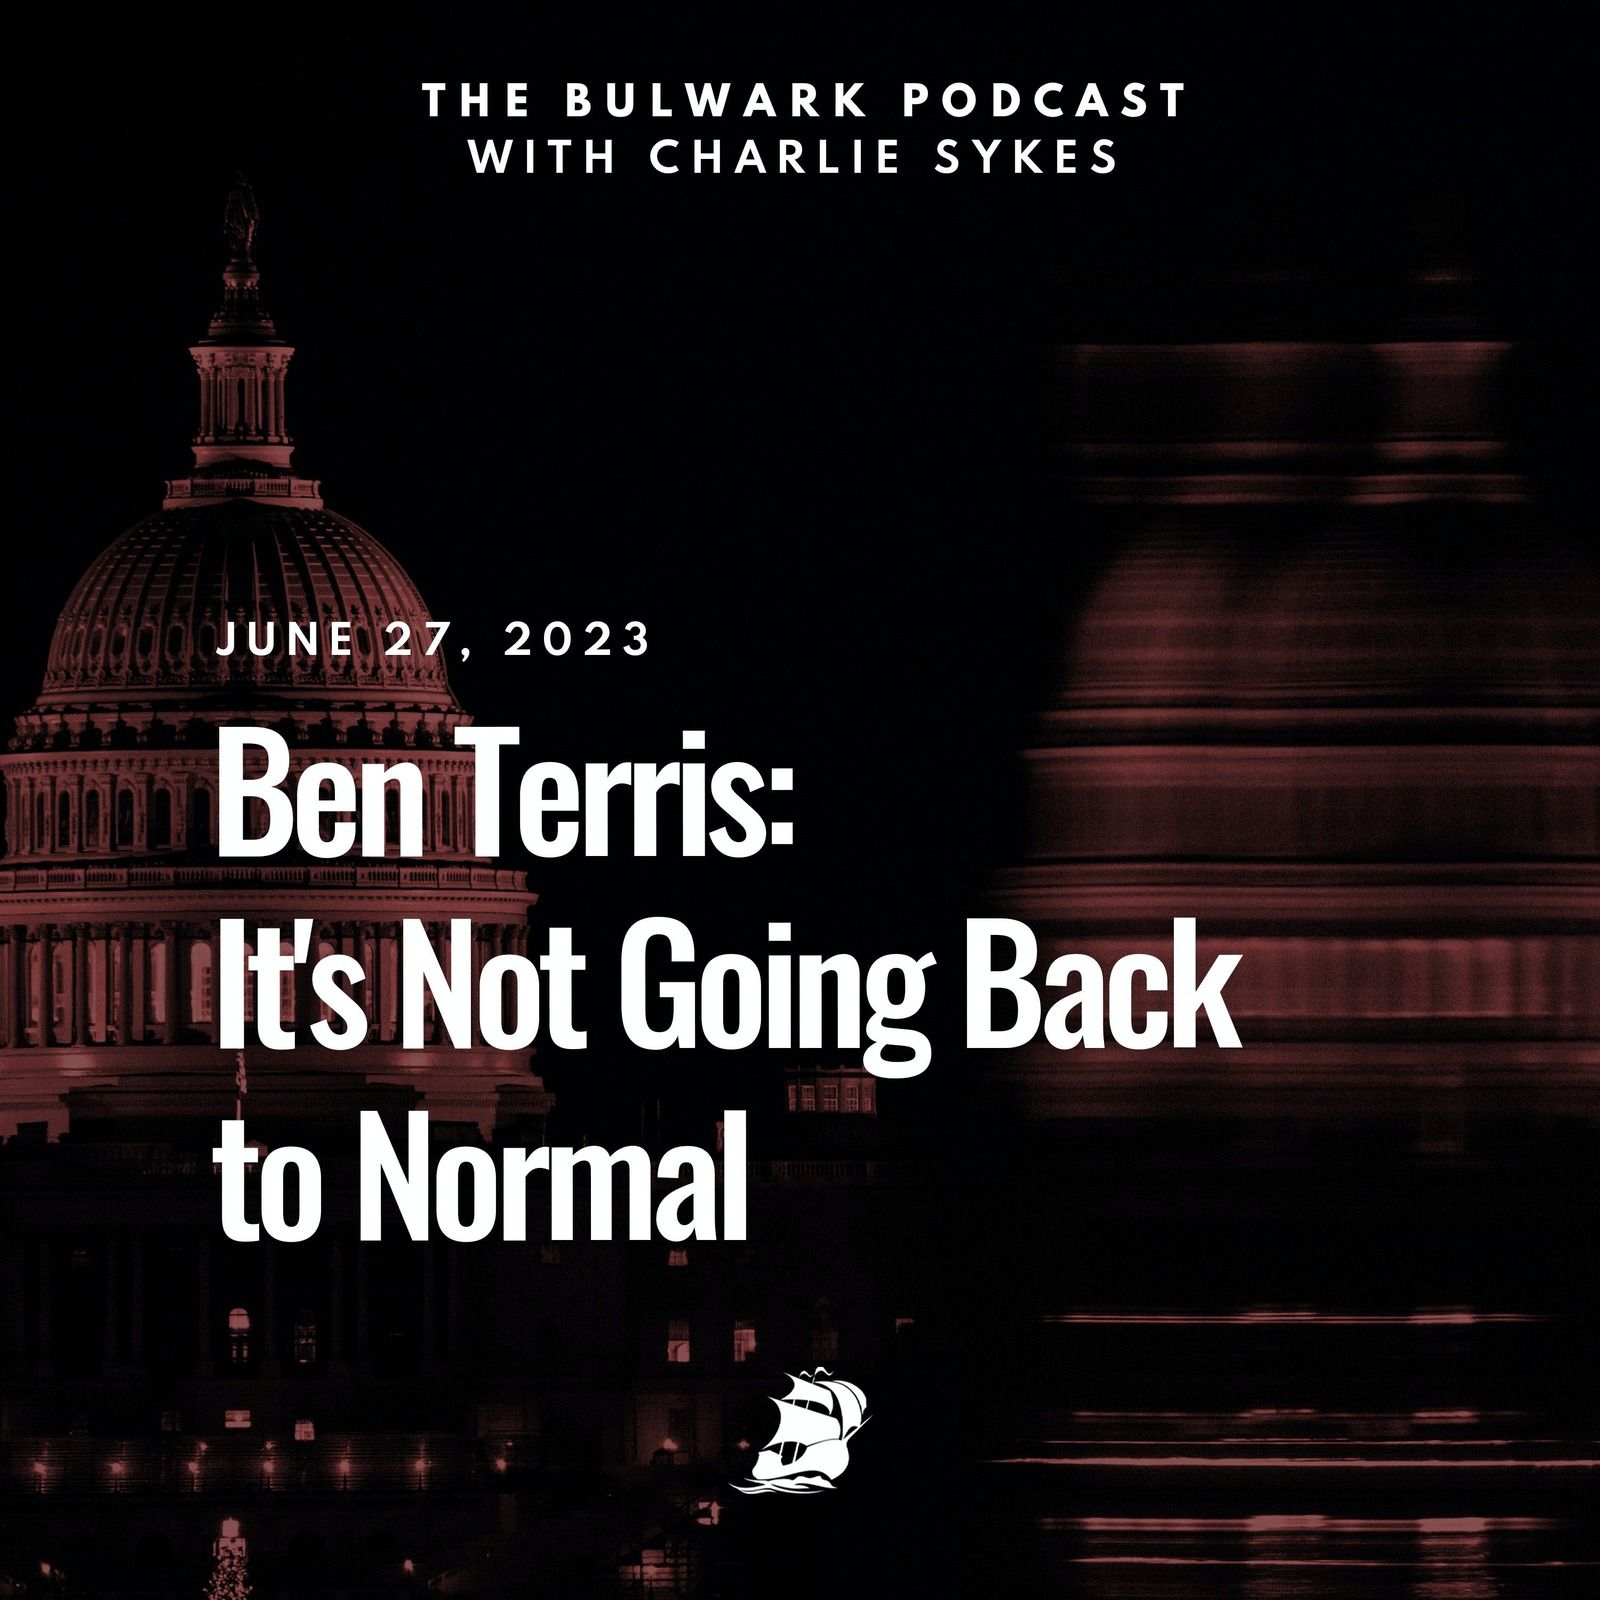 Ben Terris: It's Not Going Back to Normal by The Bulwark Podcast